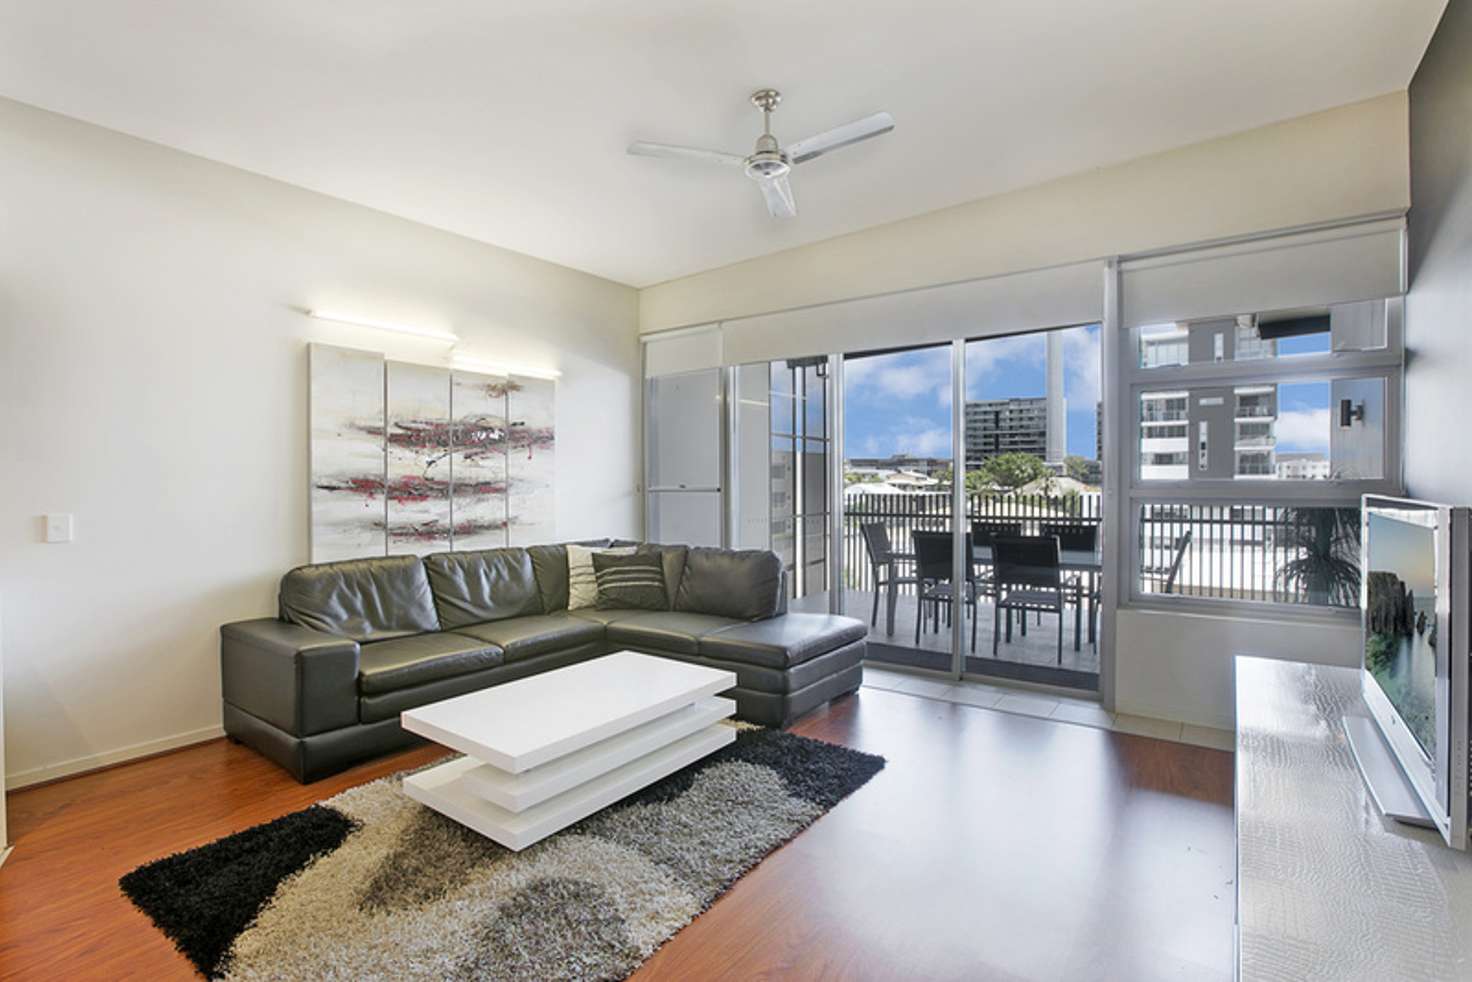 Main view of Homely apartment listing, 1534/24 Cordelia St, South Brisbane QLD 4101